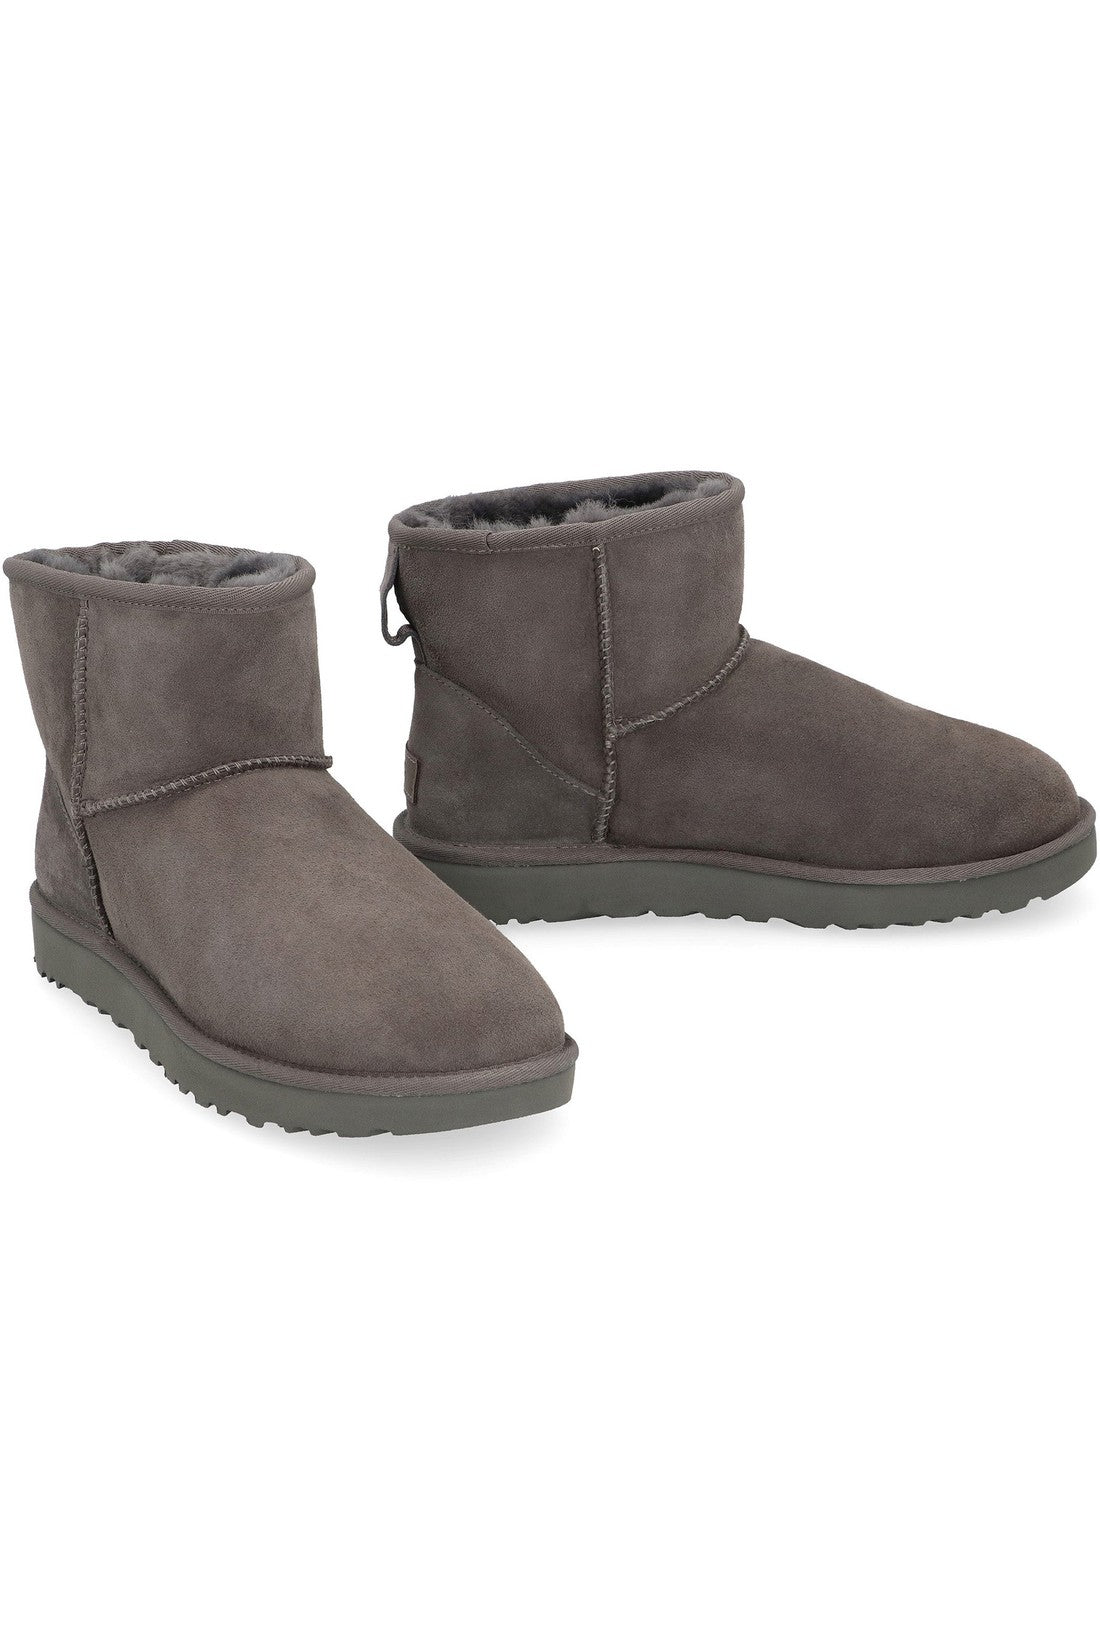 UGG-OUTLET-SALE-Classic Mini II ankle boots-ARCHIVIST